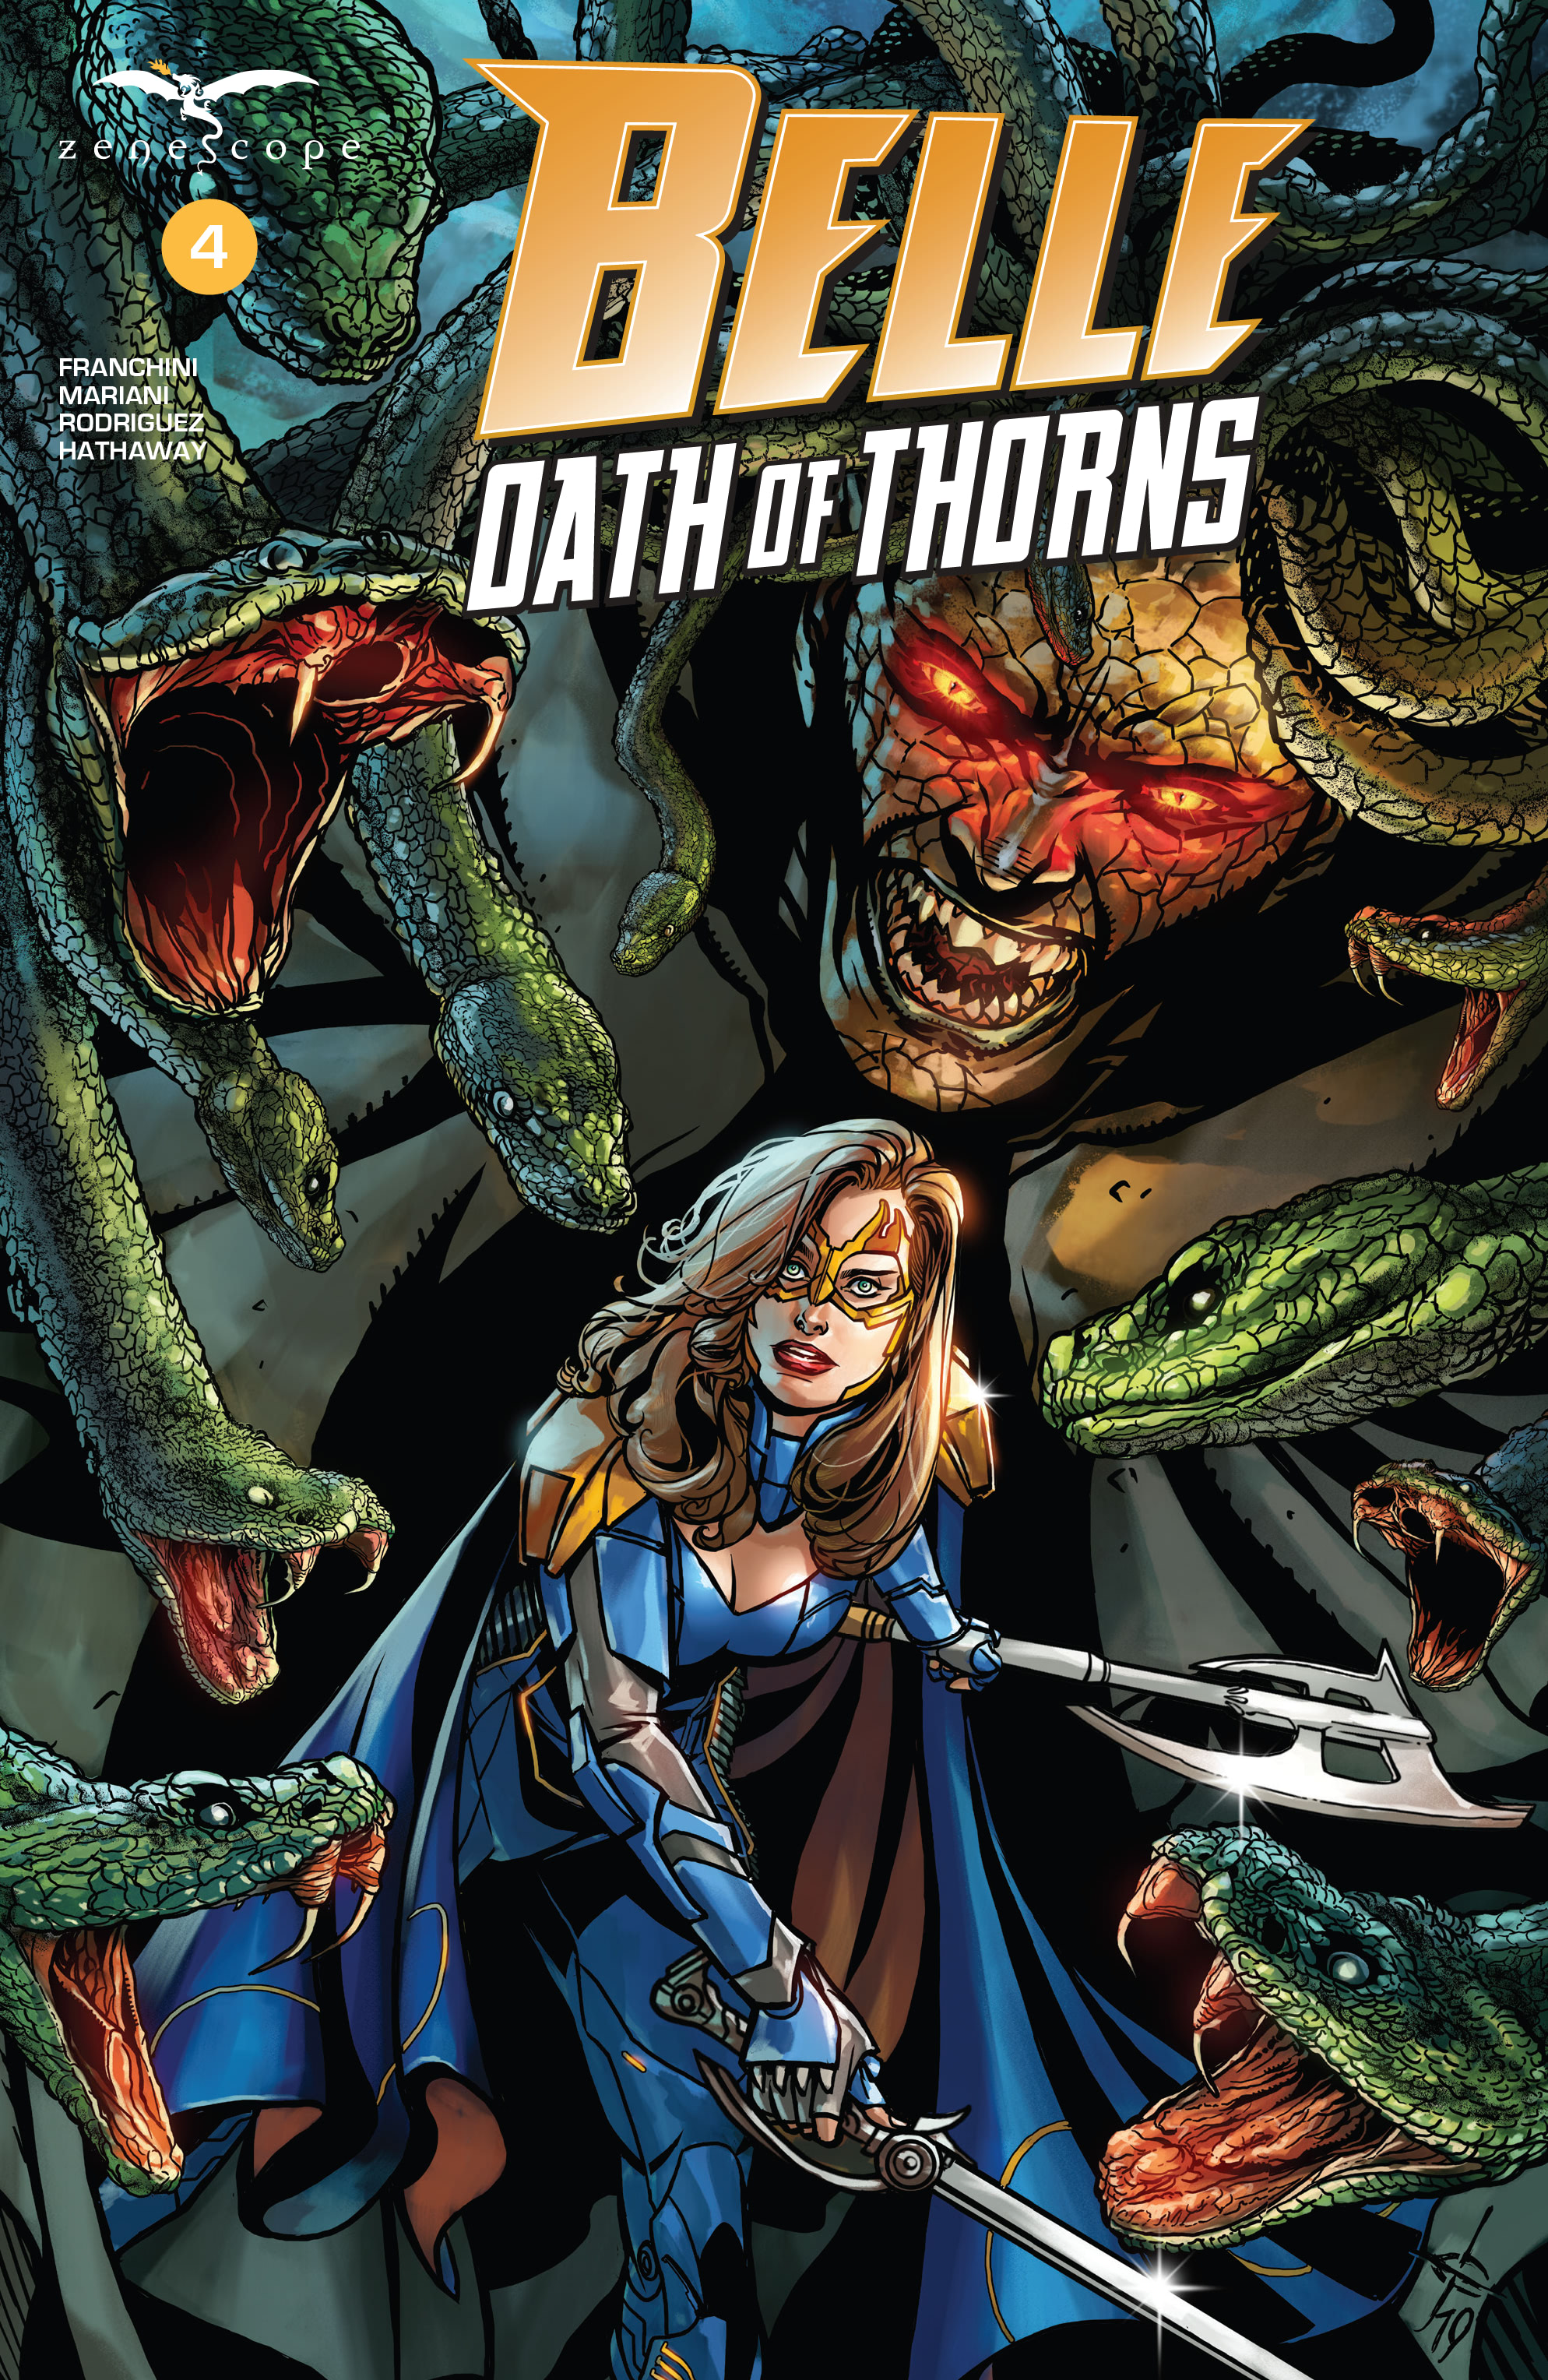 Read online Belle: Oath of Thorns comic -  Issue #4 - 1